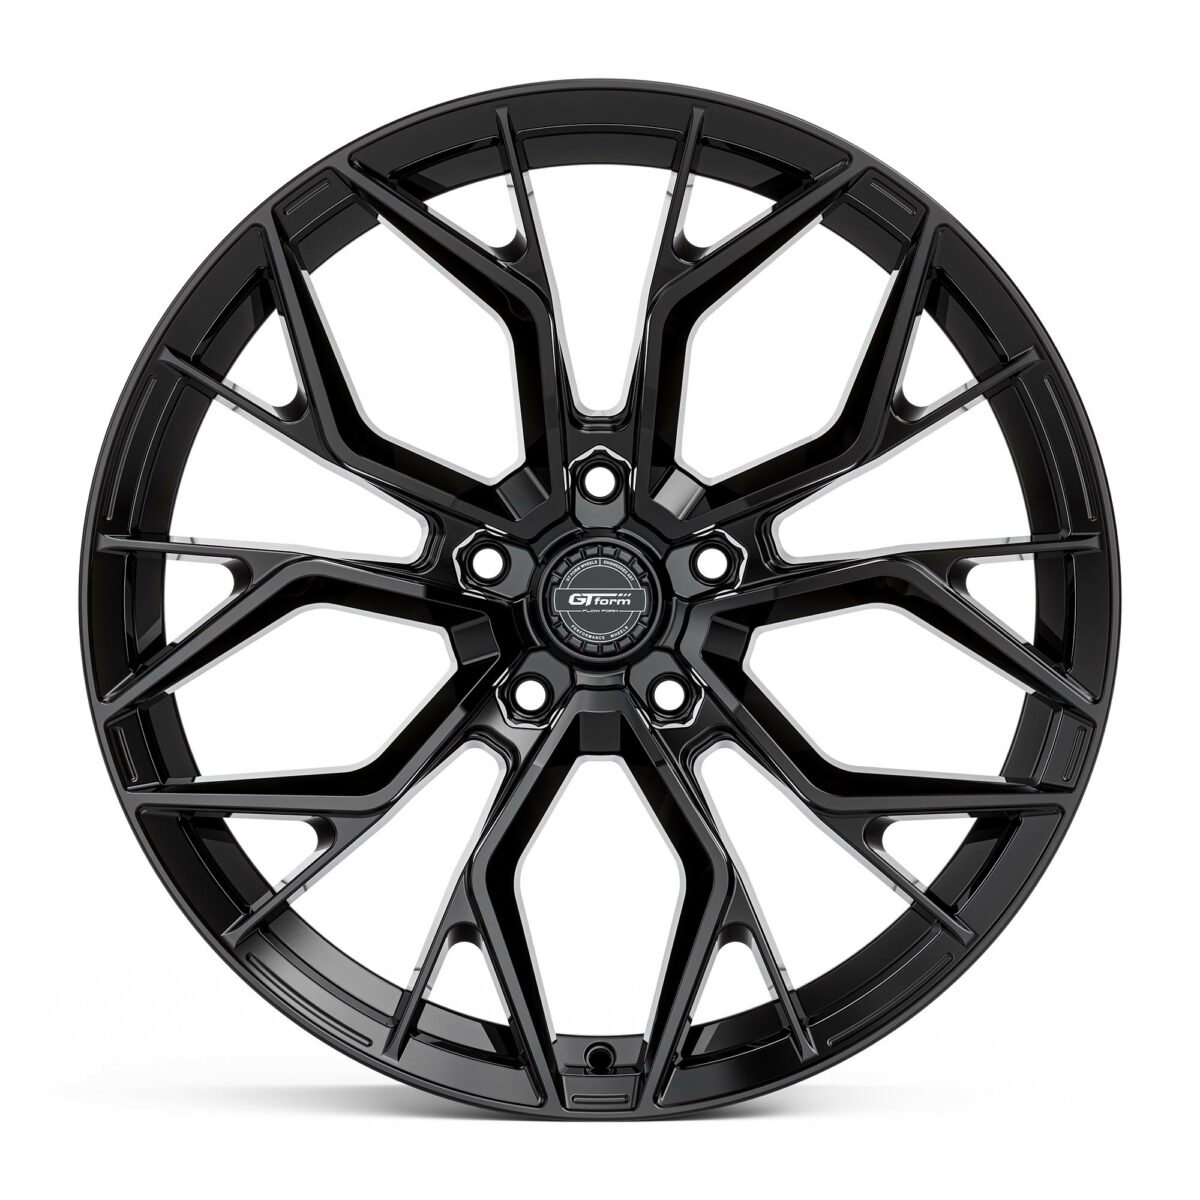 GT Form Marquee Gloss Black Staggered Rims 18 19 inch Performance Wheels